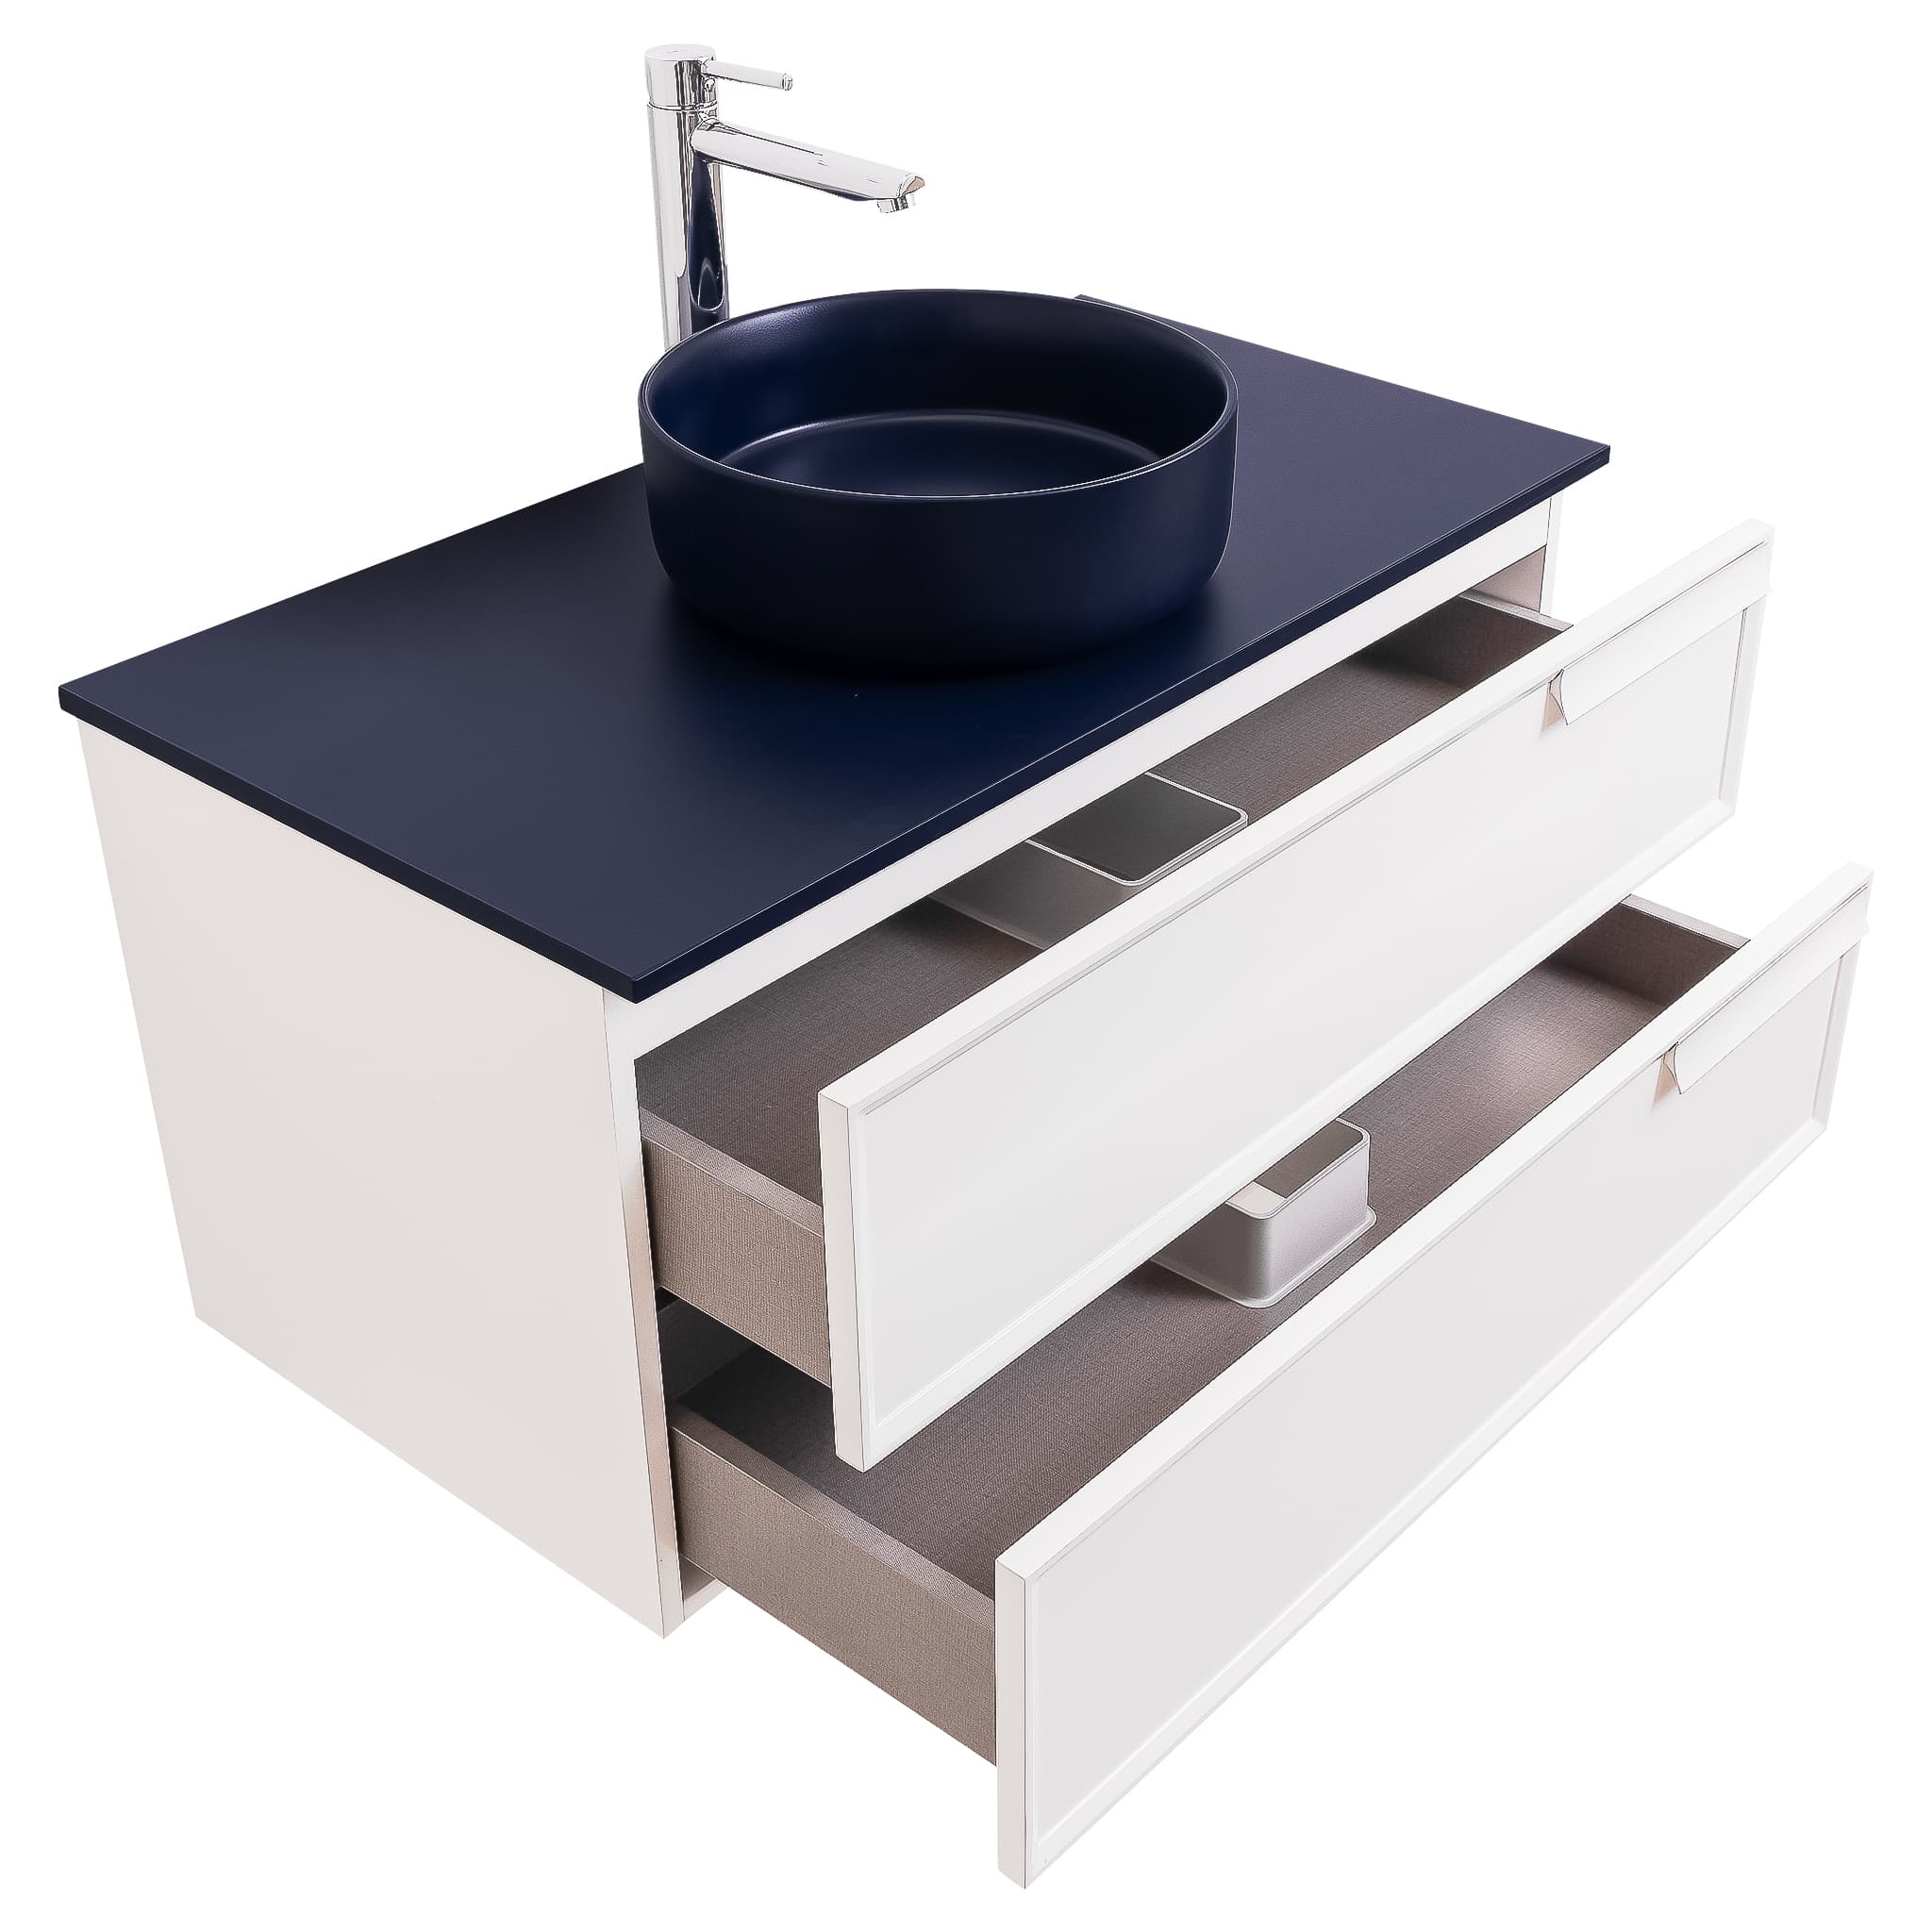 Garda 31.5 Matte White Cabinet, Ares Navy Blue Top and Ares Navy Blue Ceramic Basin, Wall Mounted Modern Vanity Set